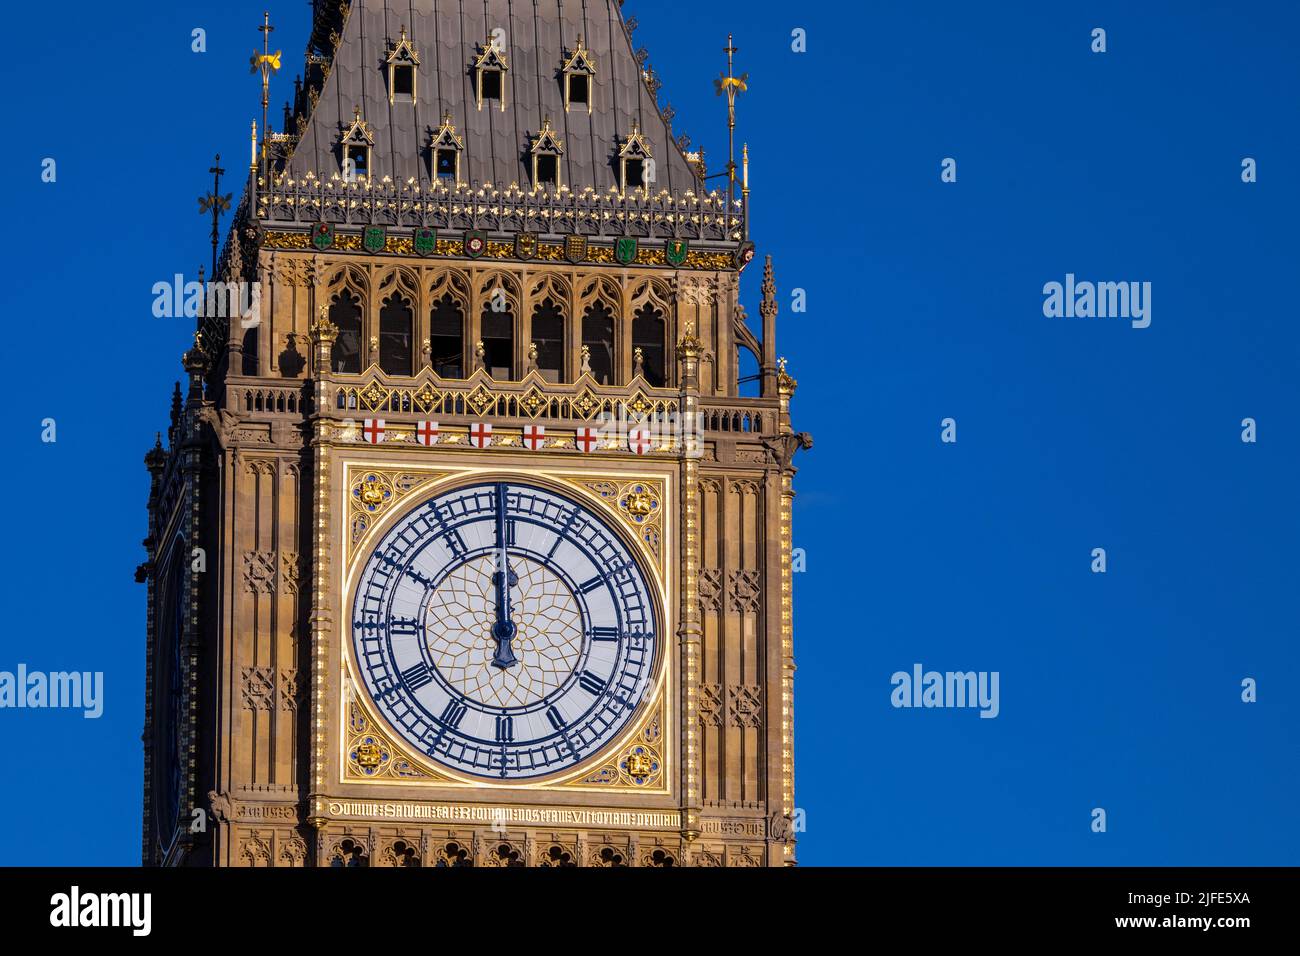 The stunning and newly renovated Elizabeth tower, of the Houses of Parliament in Westminster, London, UK. Stock Photo